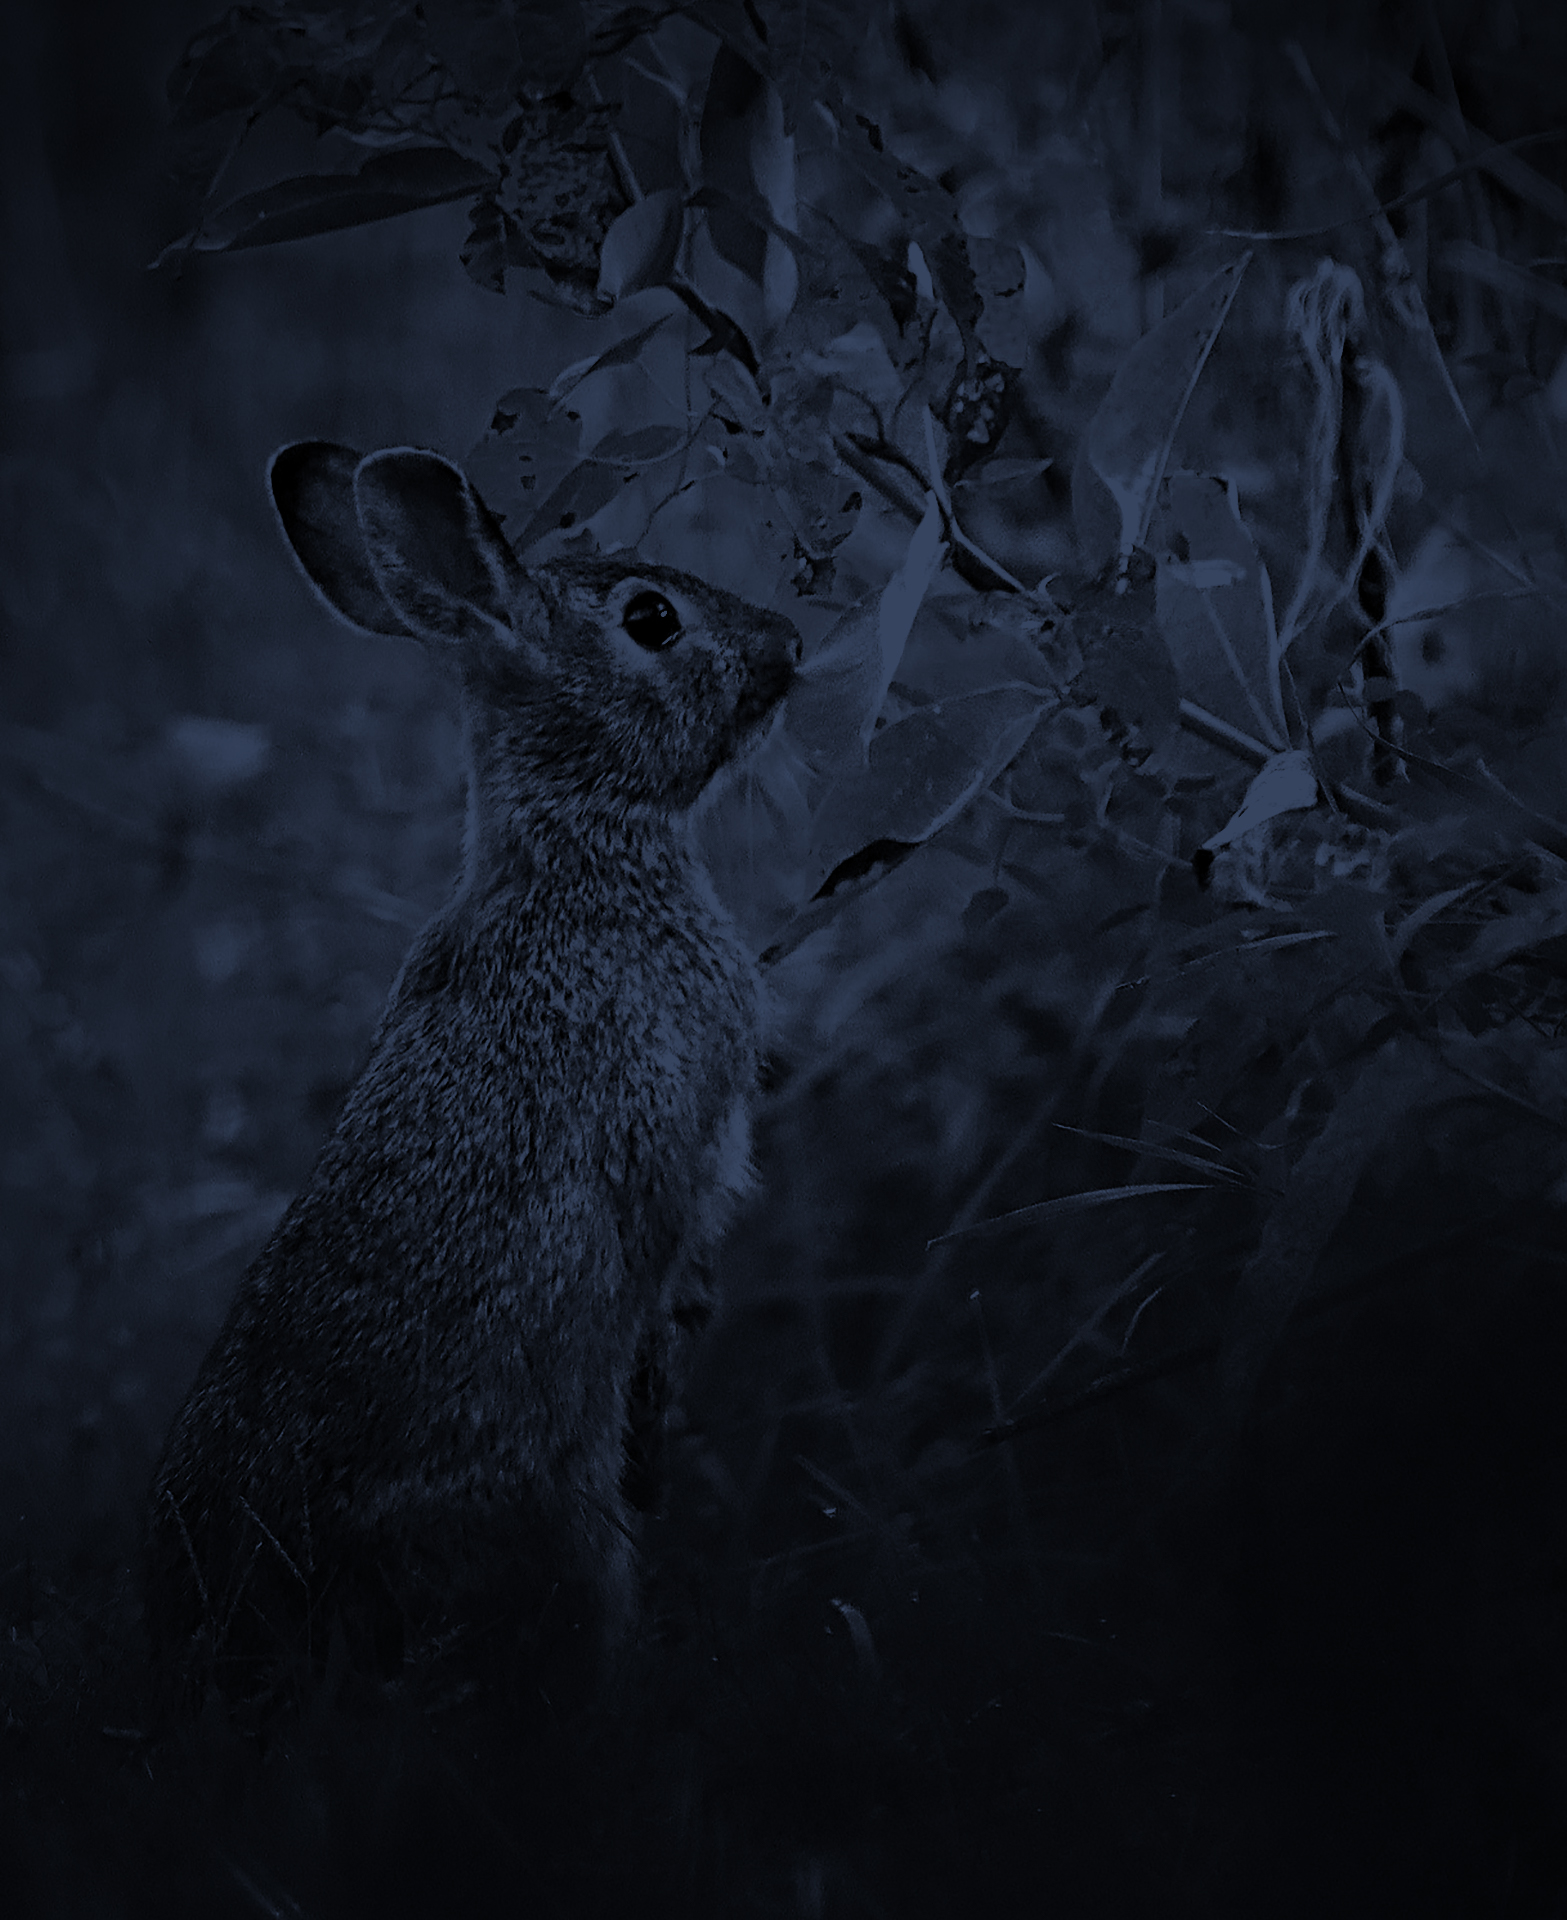 Bandit in the grass at night, suddenly sits up, alerted by a strange sound.